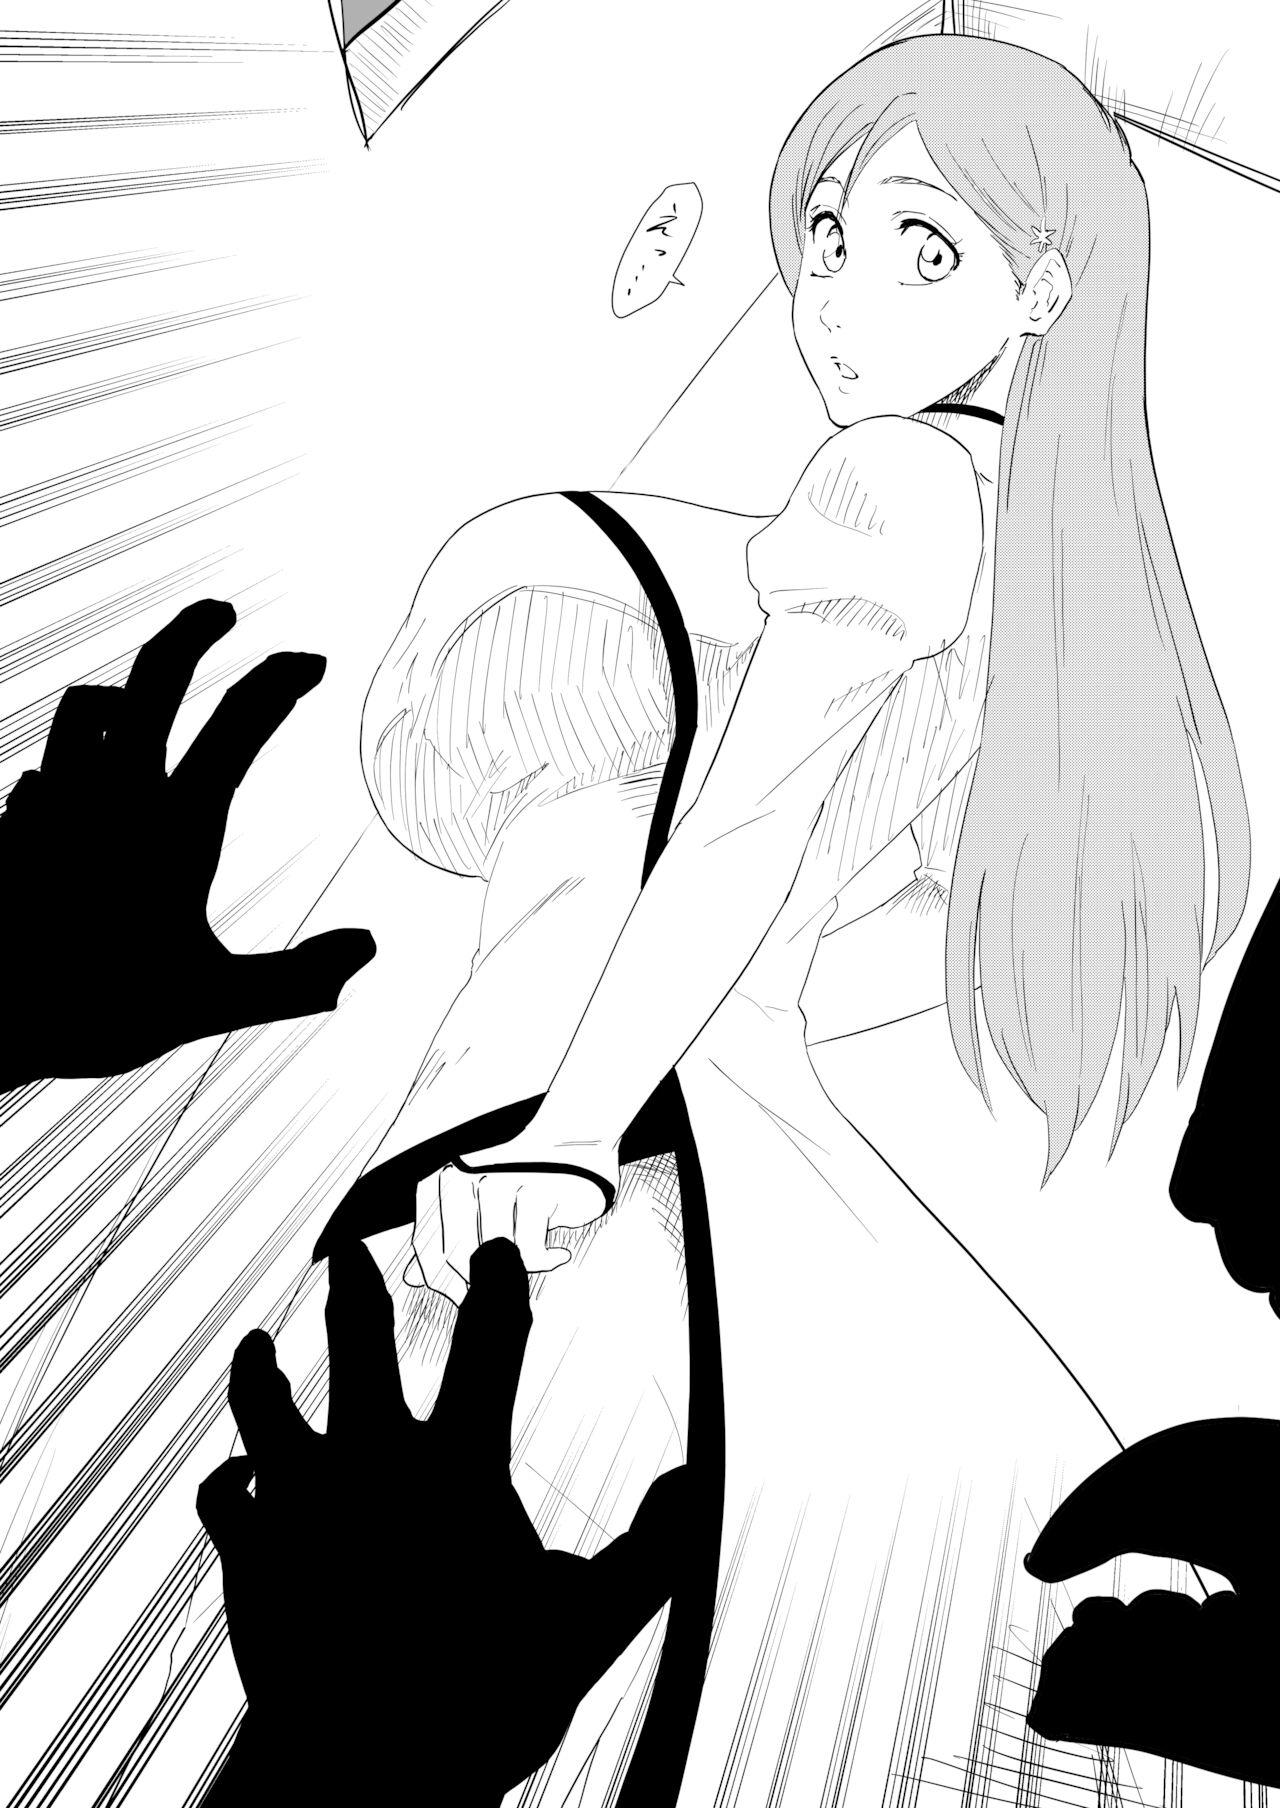 Daring Orihime is attacked by goblin-like hollows - Bleach Asian Babes - Page 3